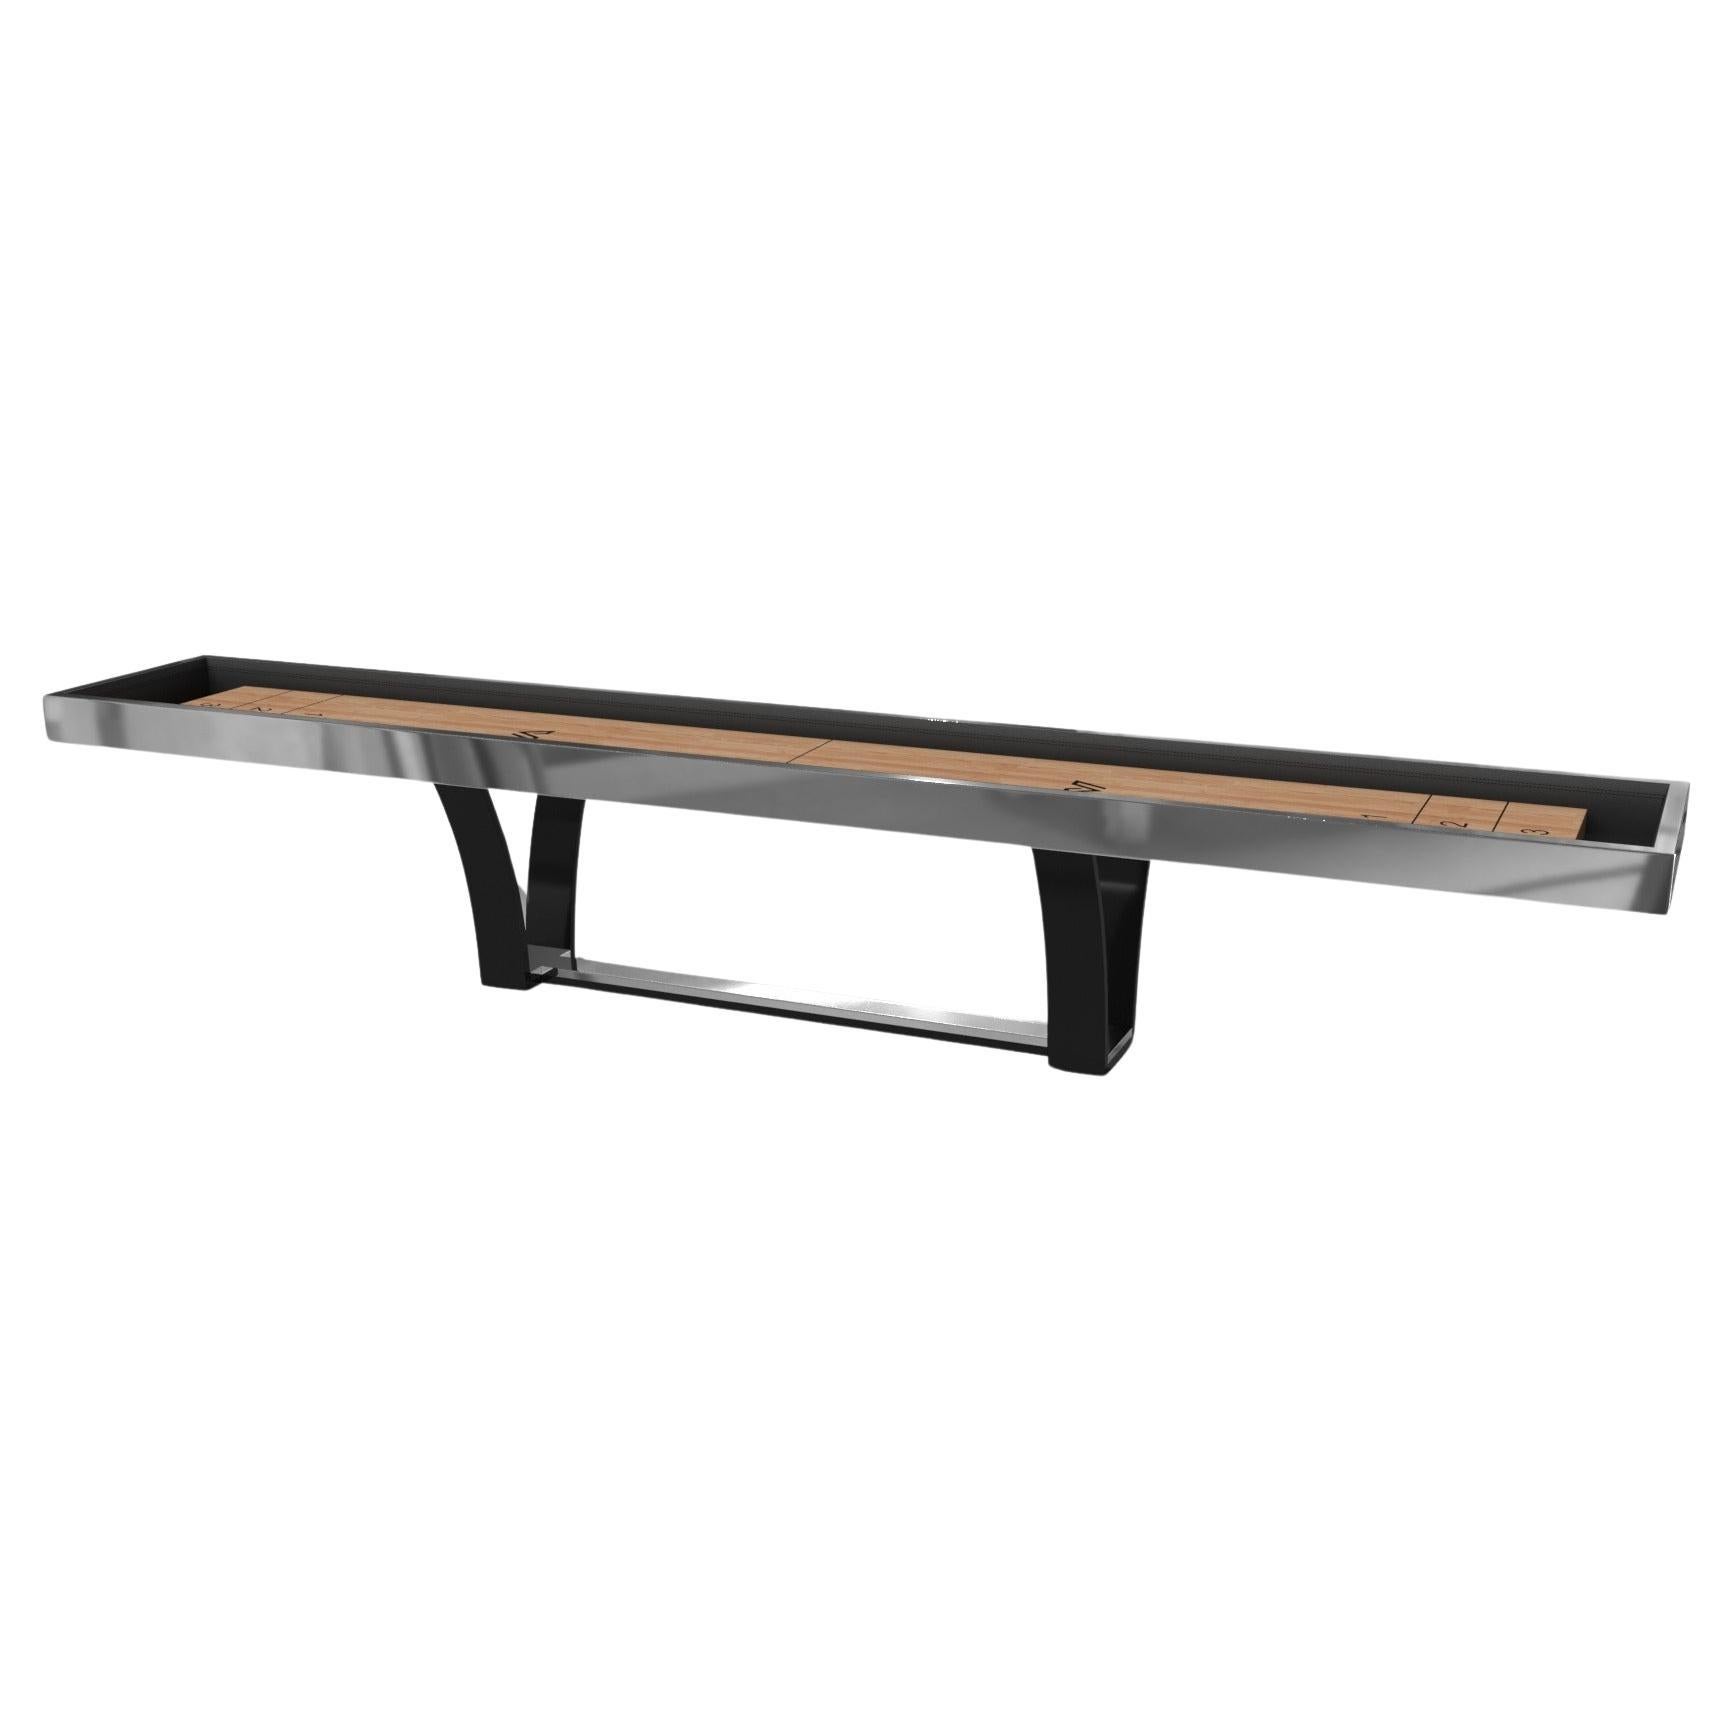 Elevate Customs Elite Shuffleboard Tables/Stainless Steel Sheet Metal in 9' -USA For Sale